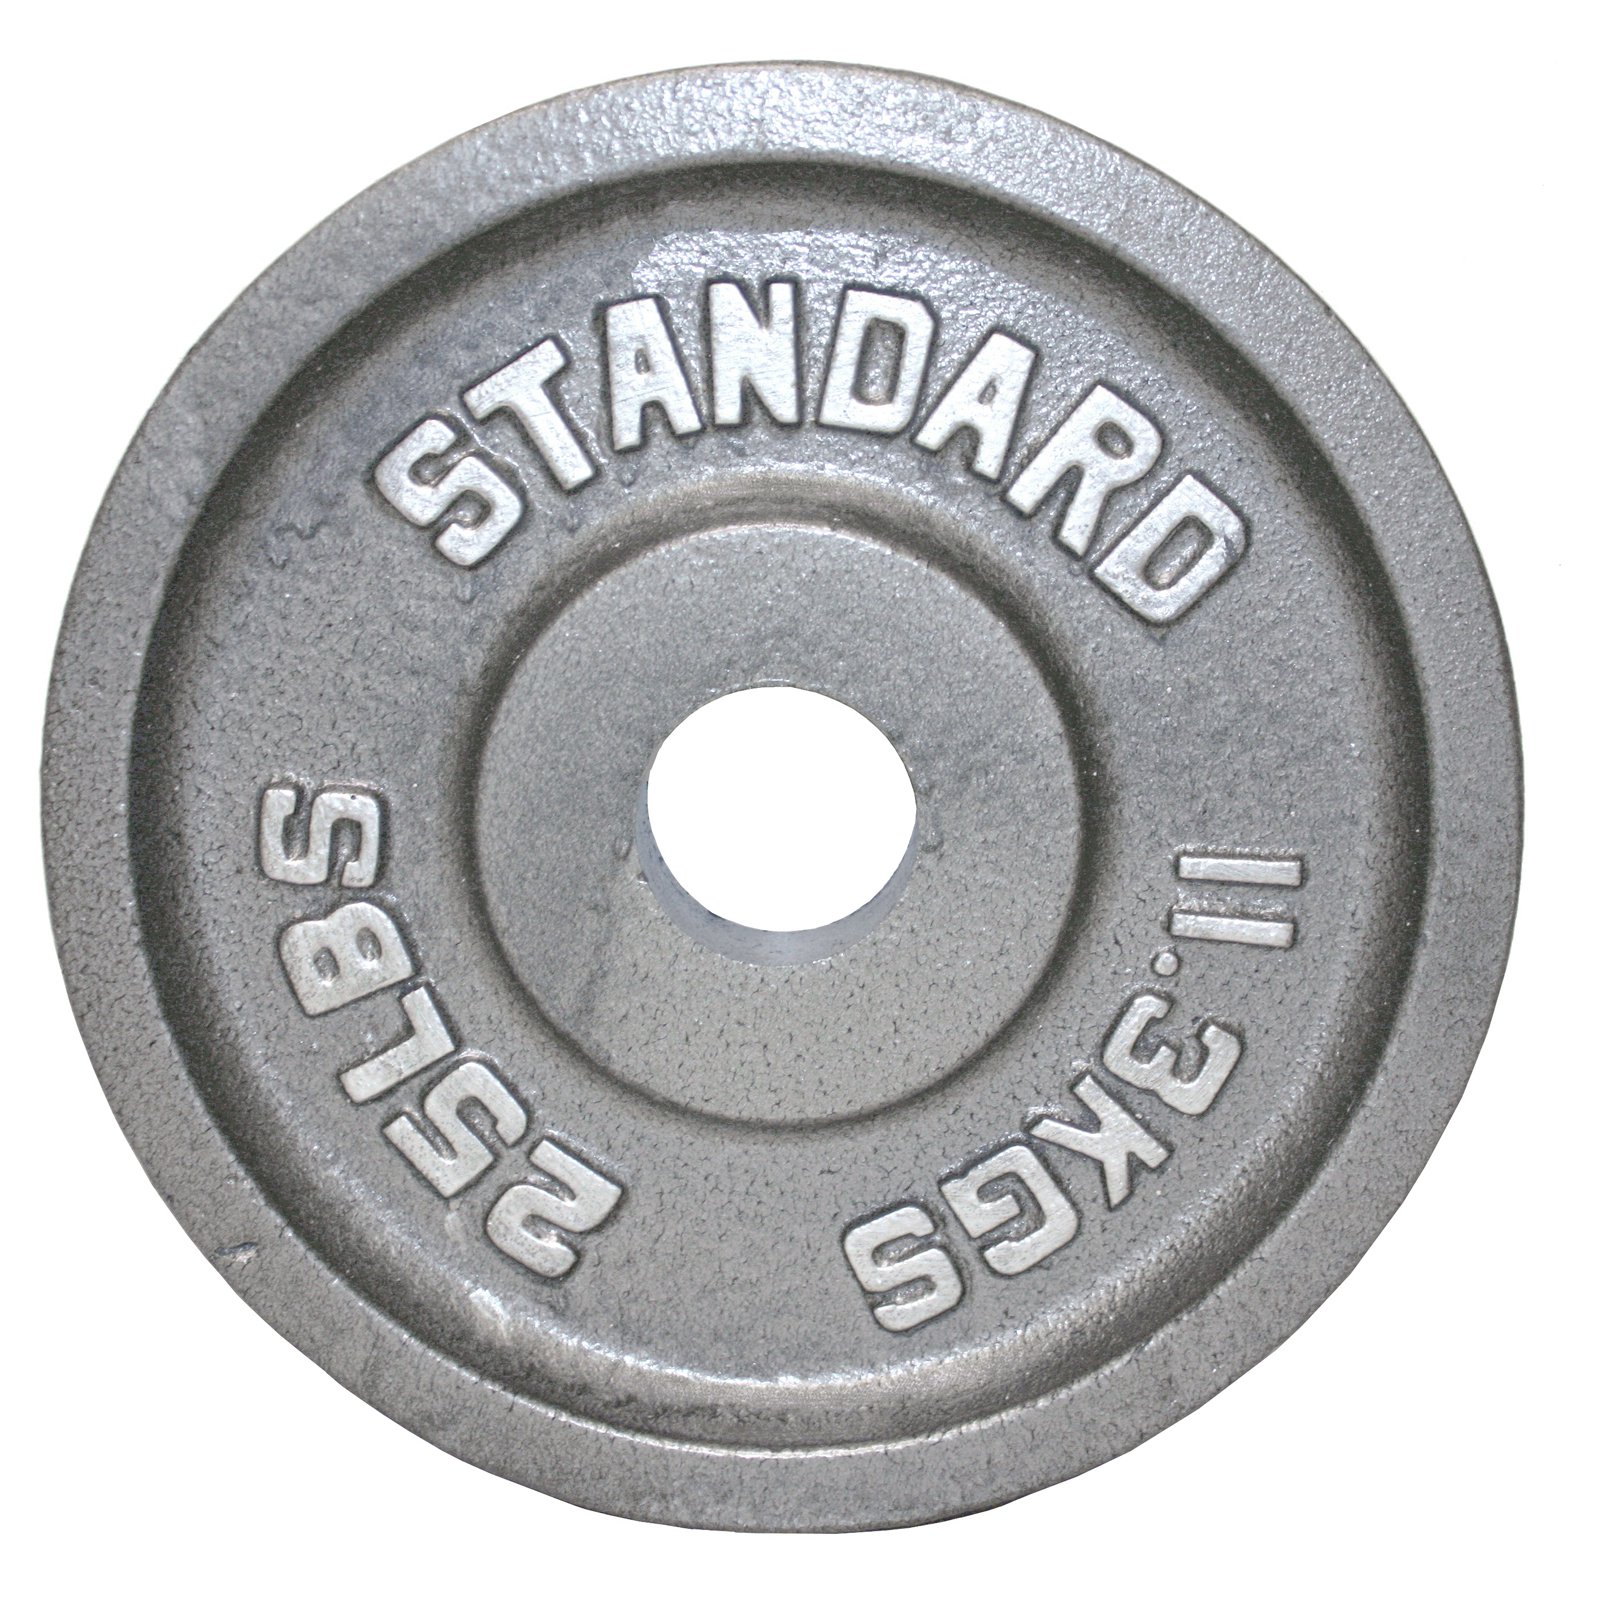 USA Sports by Troy Barbell Gray Olympic Weight Plate - Walmart.com